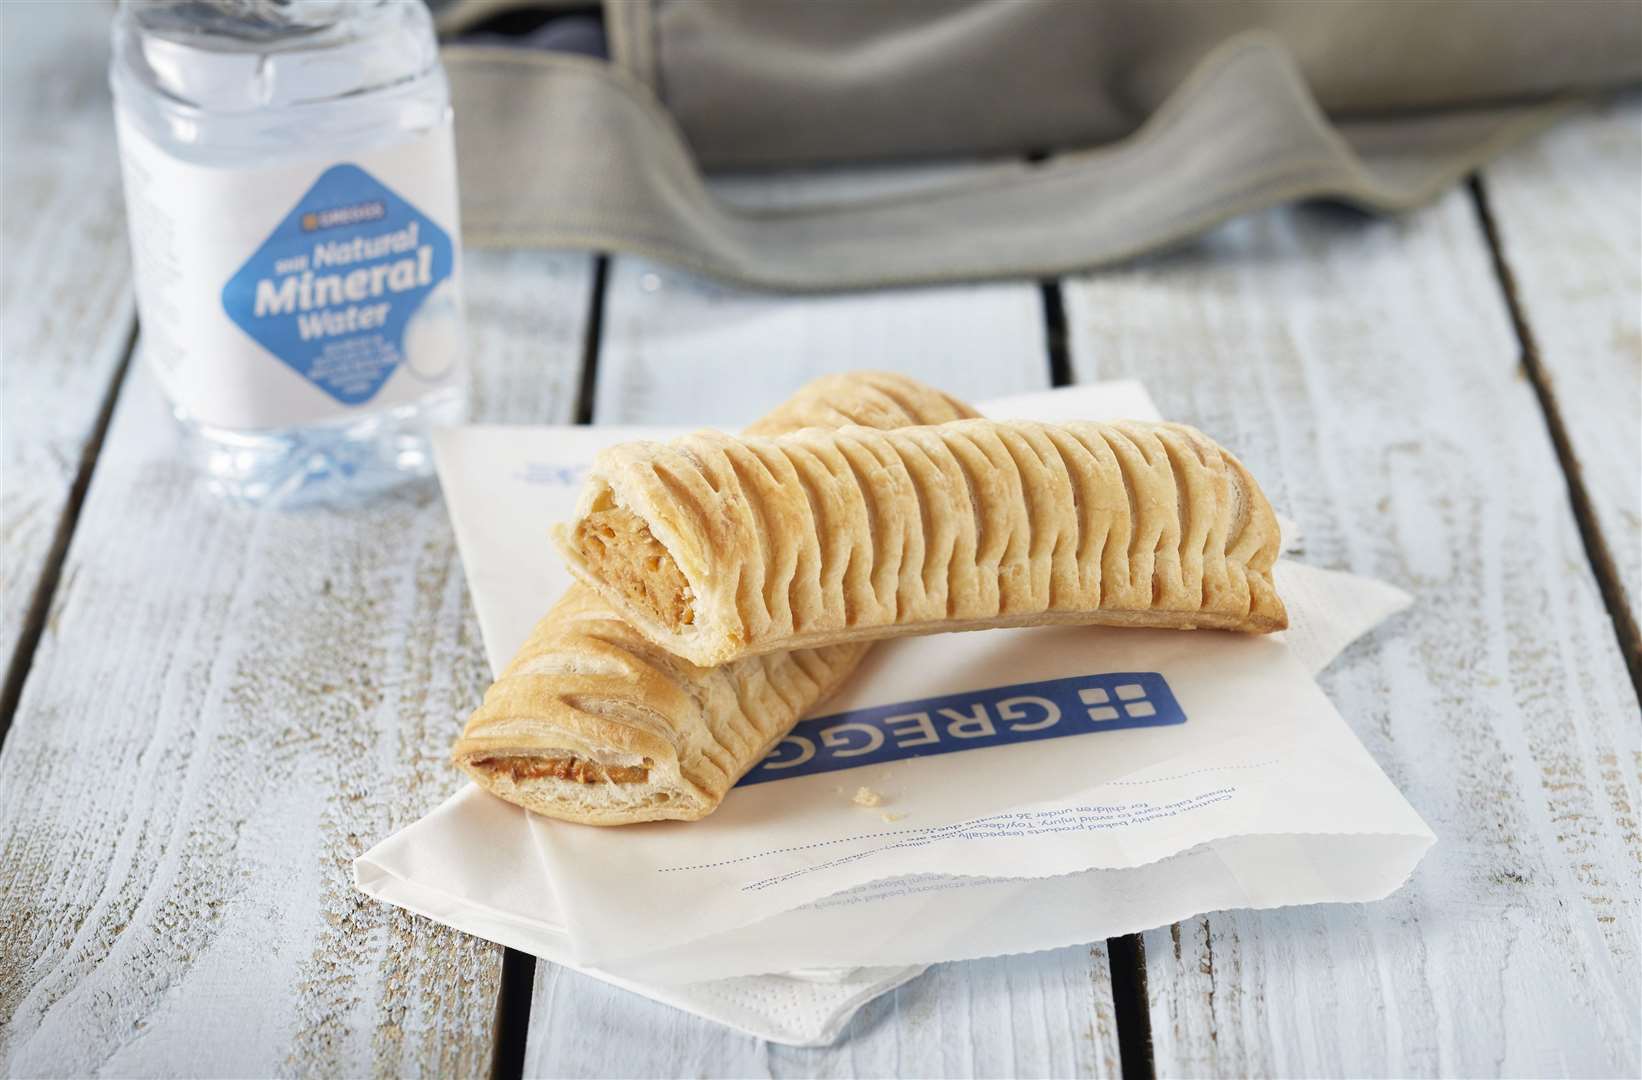 The Greggs vegan sausage roll is being rolled out across Kent this month and in March